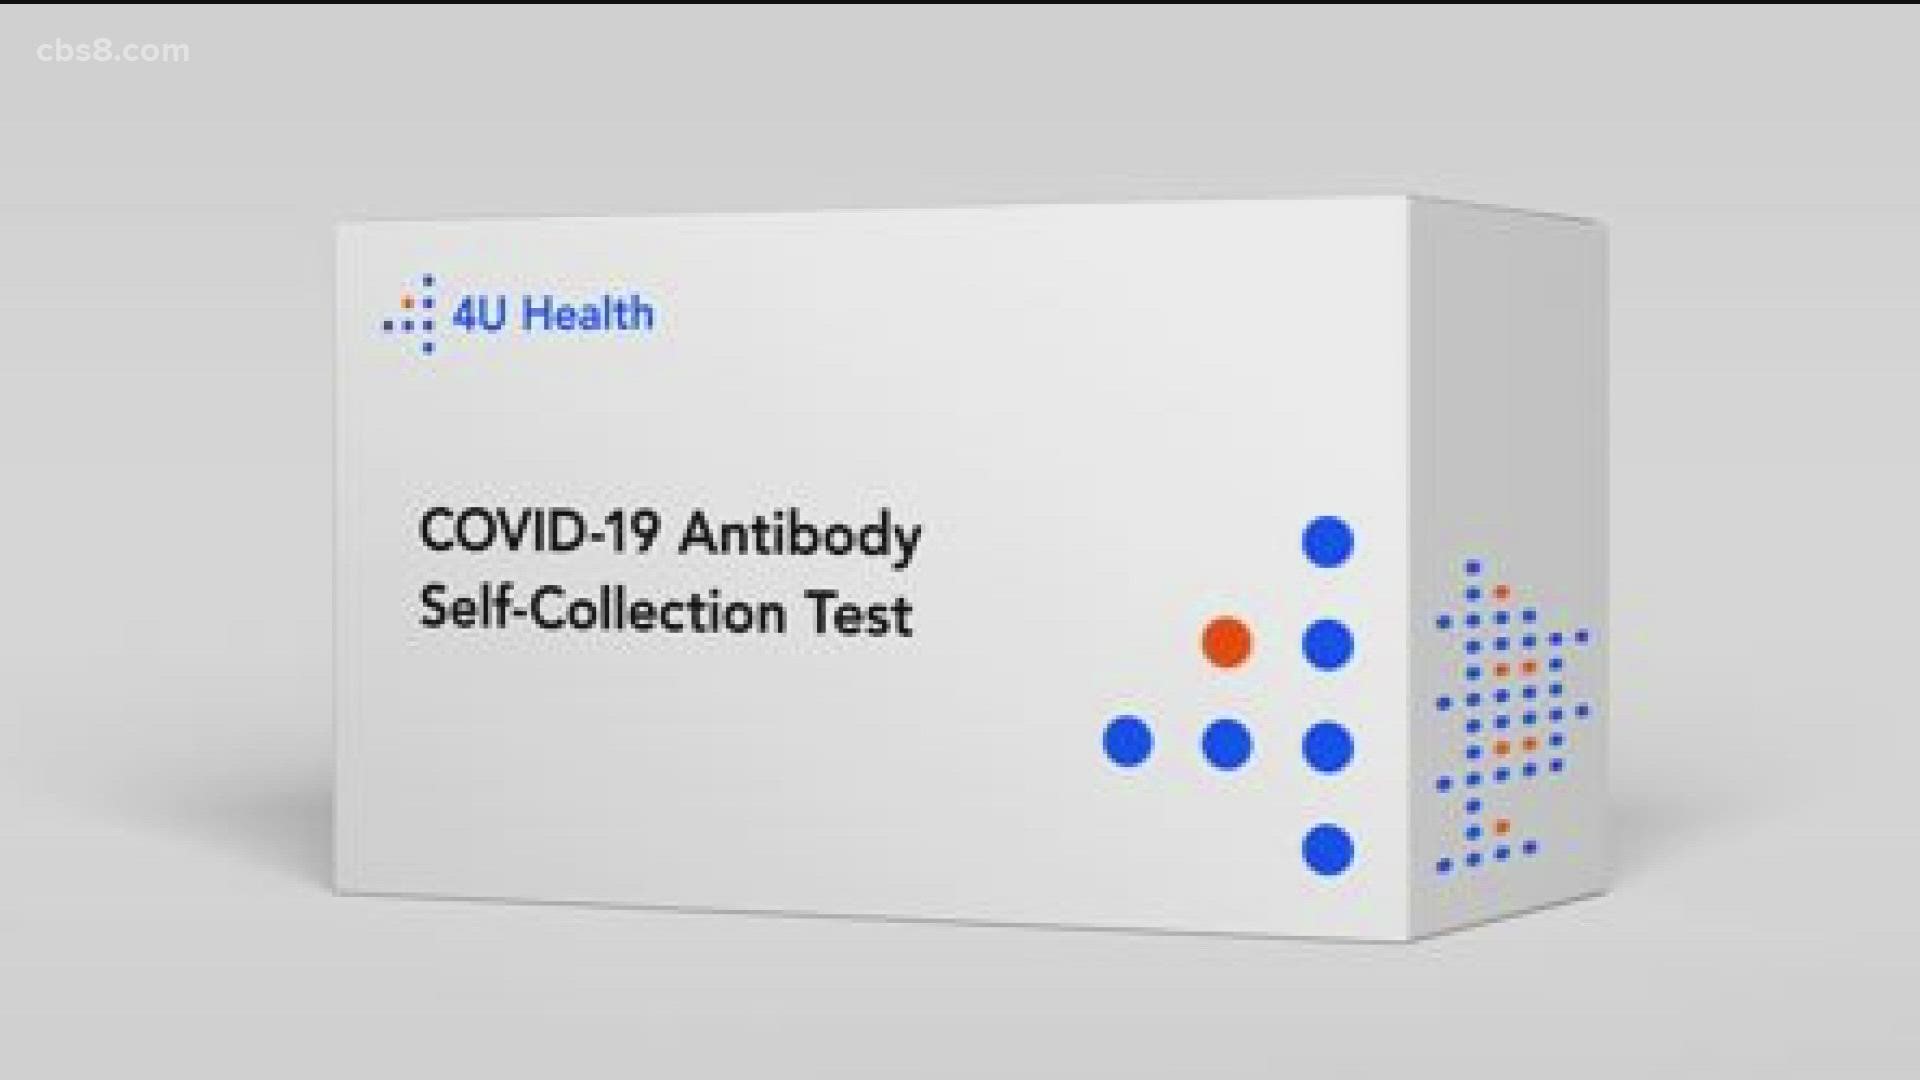 Even if you've been infected with COVID or received a vaccine, you can still get re-infected or spread the virus no matter if you have antibodies.